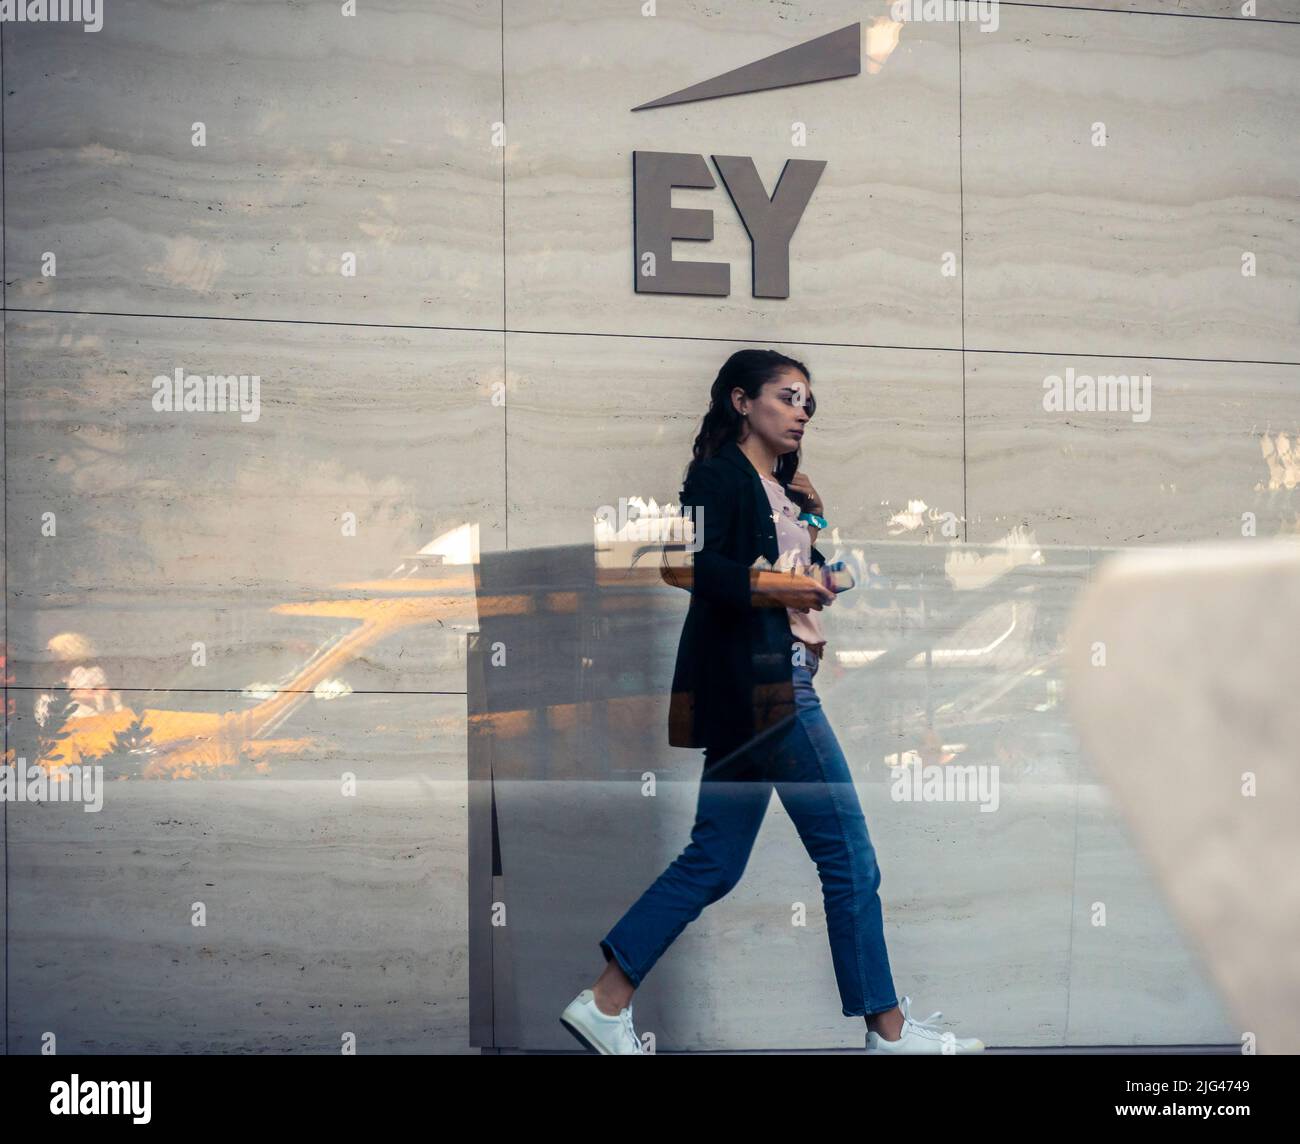 The logo of the accounting firm Ernst & Young (EY) is seen on the wall of the lobby of Brookfield’s Manhattan West office building in Hudson Yards in New York on Wednesday, June 29, 2022. EY has been fined $100 million by the SEC after it was discovered that some of its employees had cheated on their CPA exams. The cheating stretches back several years and EY was cognizant of it but did not take any action. (© Richard B. Levine) Stock Photo